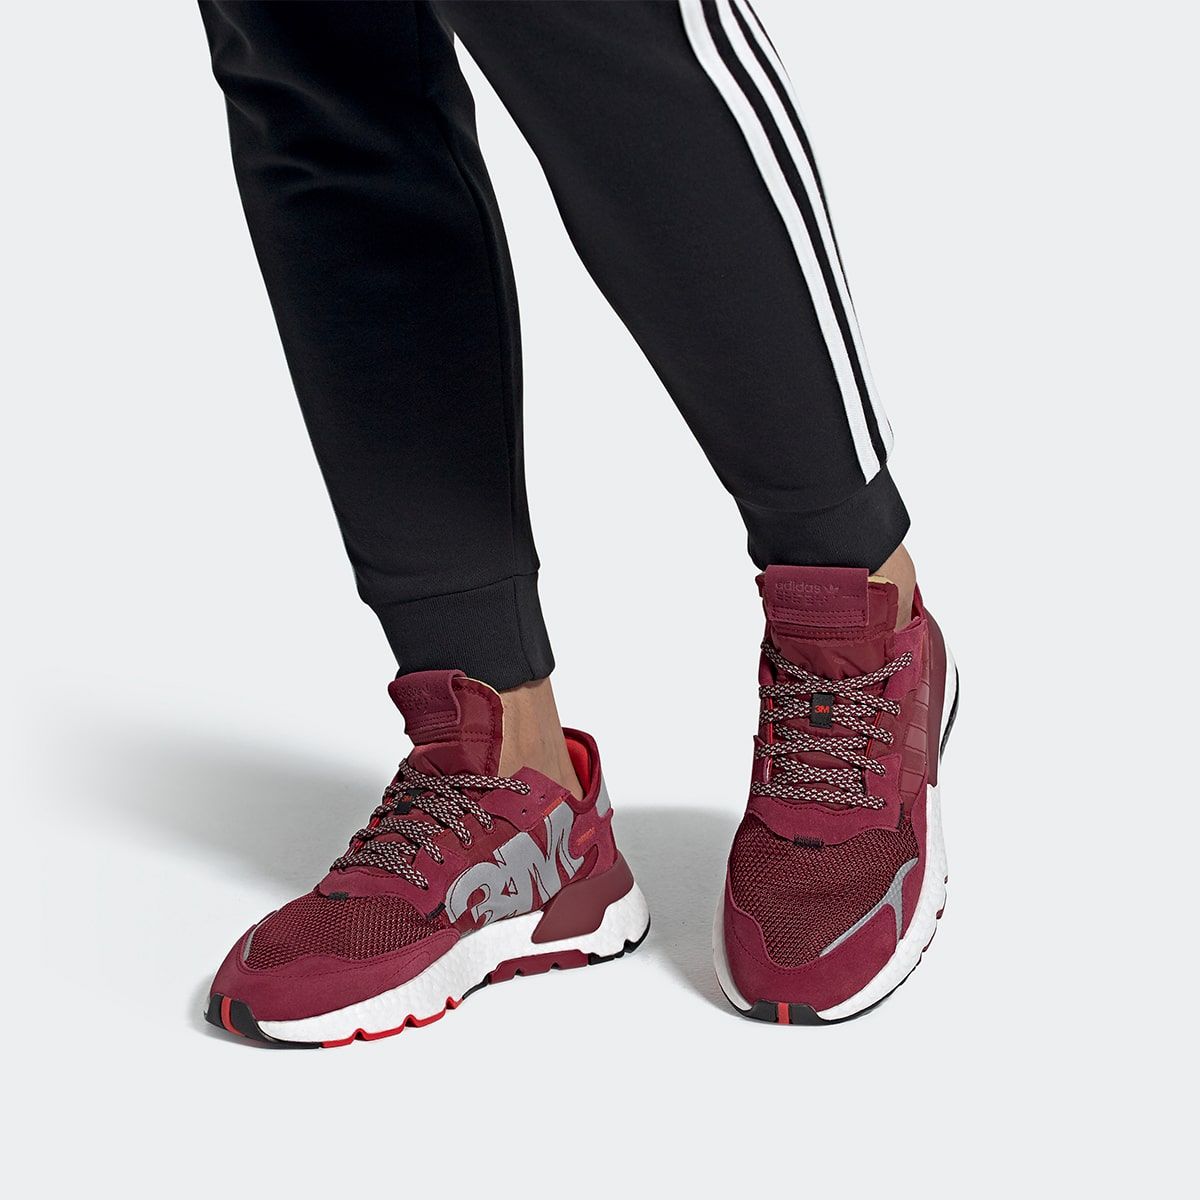 The 3M x adidas Nite Jogger Returns with Eight New Color Options ... عربة قهوة